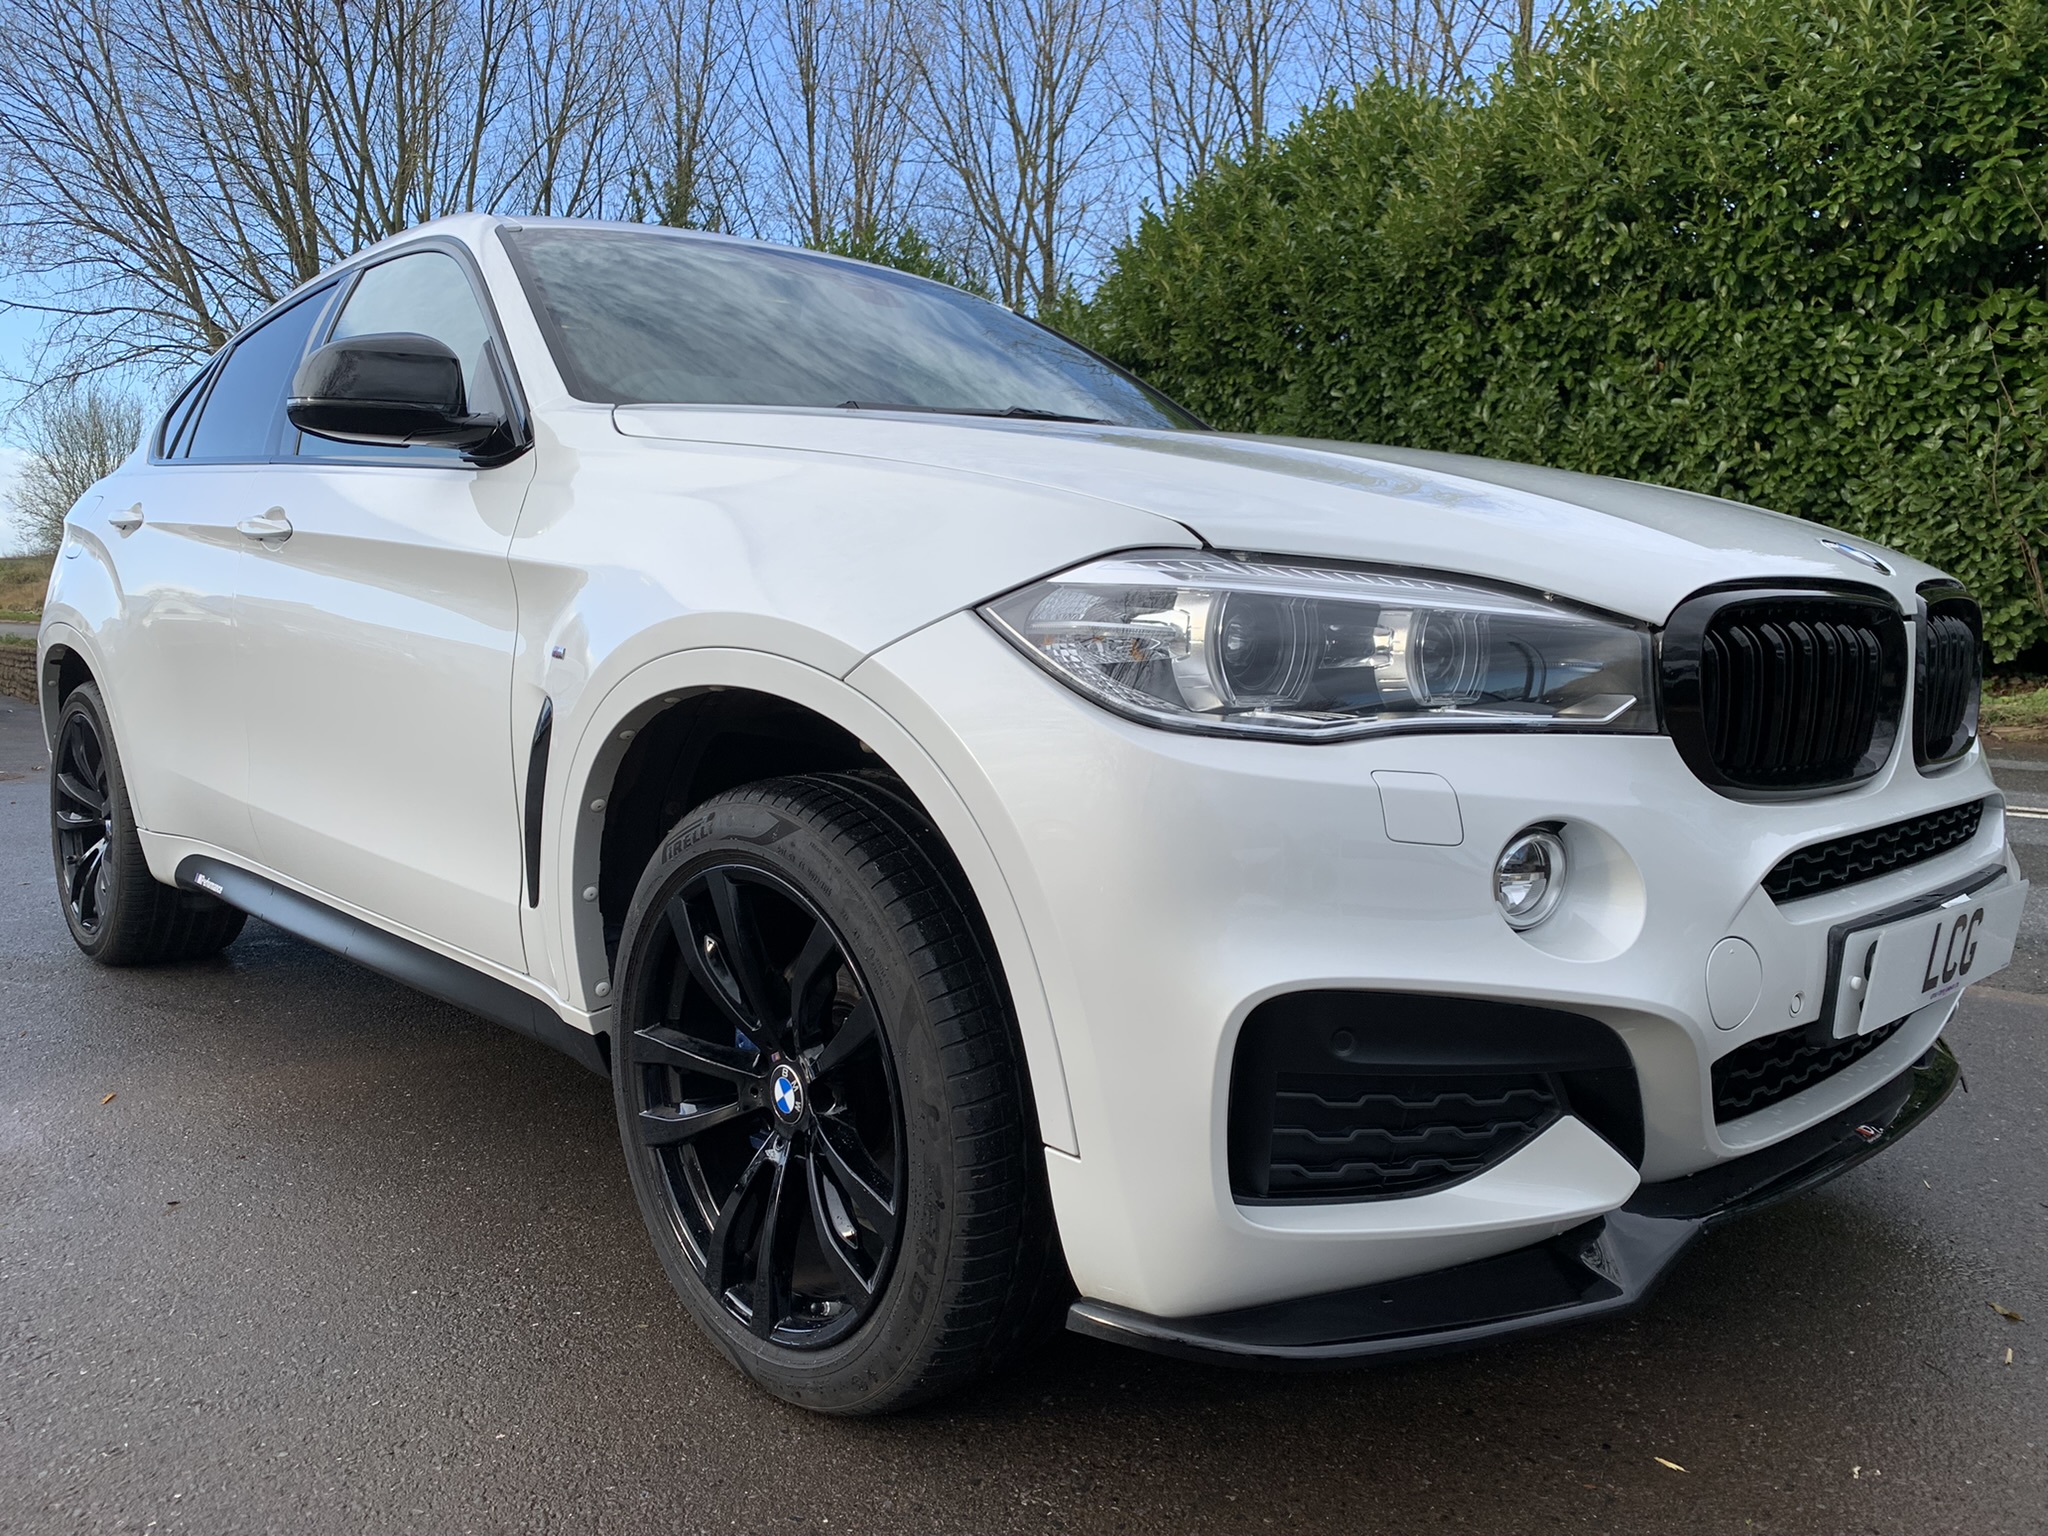 Used BMW X6 xDrive30d M Sport Edition Hatchback car for sale in Exeter, Devon